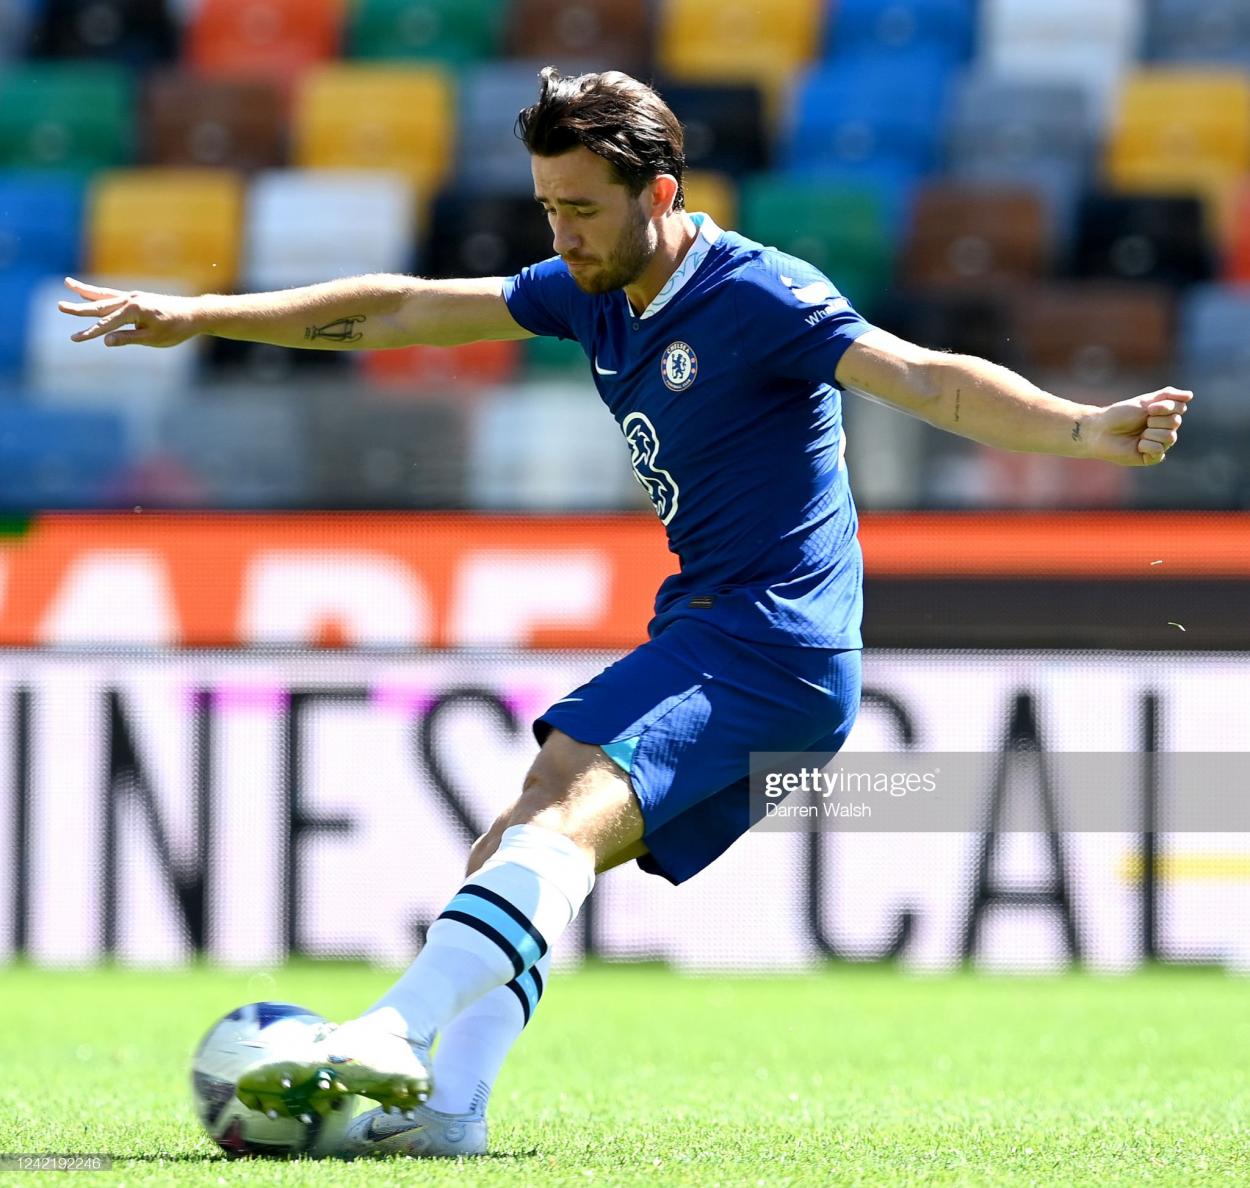 UDINE, ITALY - JULY 30: Ben Chilwell of Chelsea in action during a pre season behind closed doors friendly match between Udinese and Chelsea at Dacia Arena on July 30, 2022 in Udine, . (Photo by Darren Walsh/Chelsea FC via Getty Images)